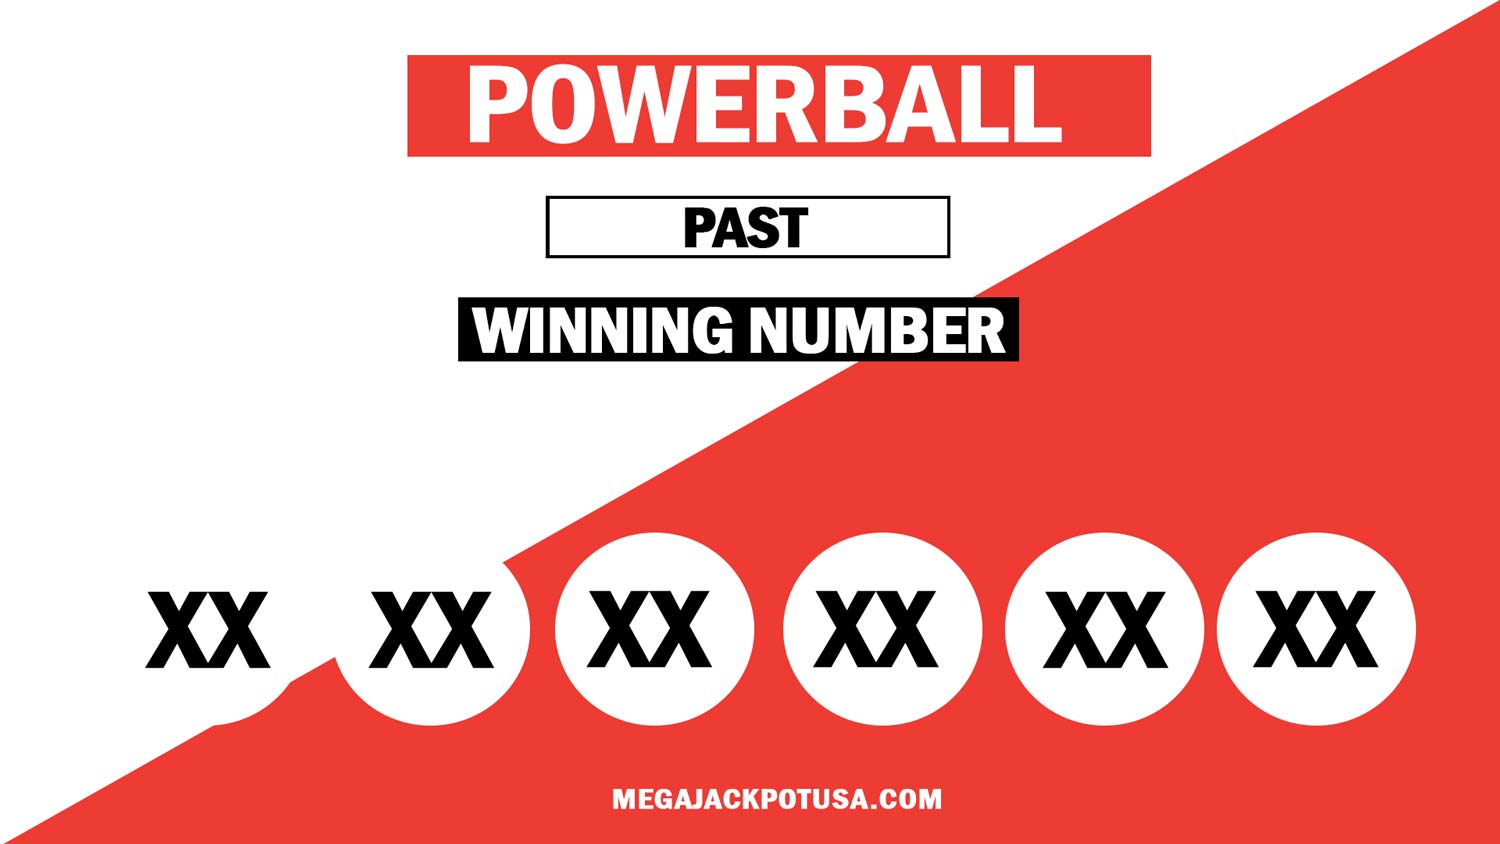 Historical Powerball past winning numbers last 6 month